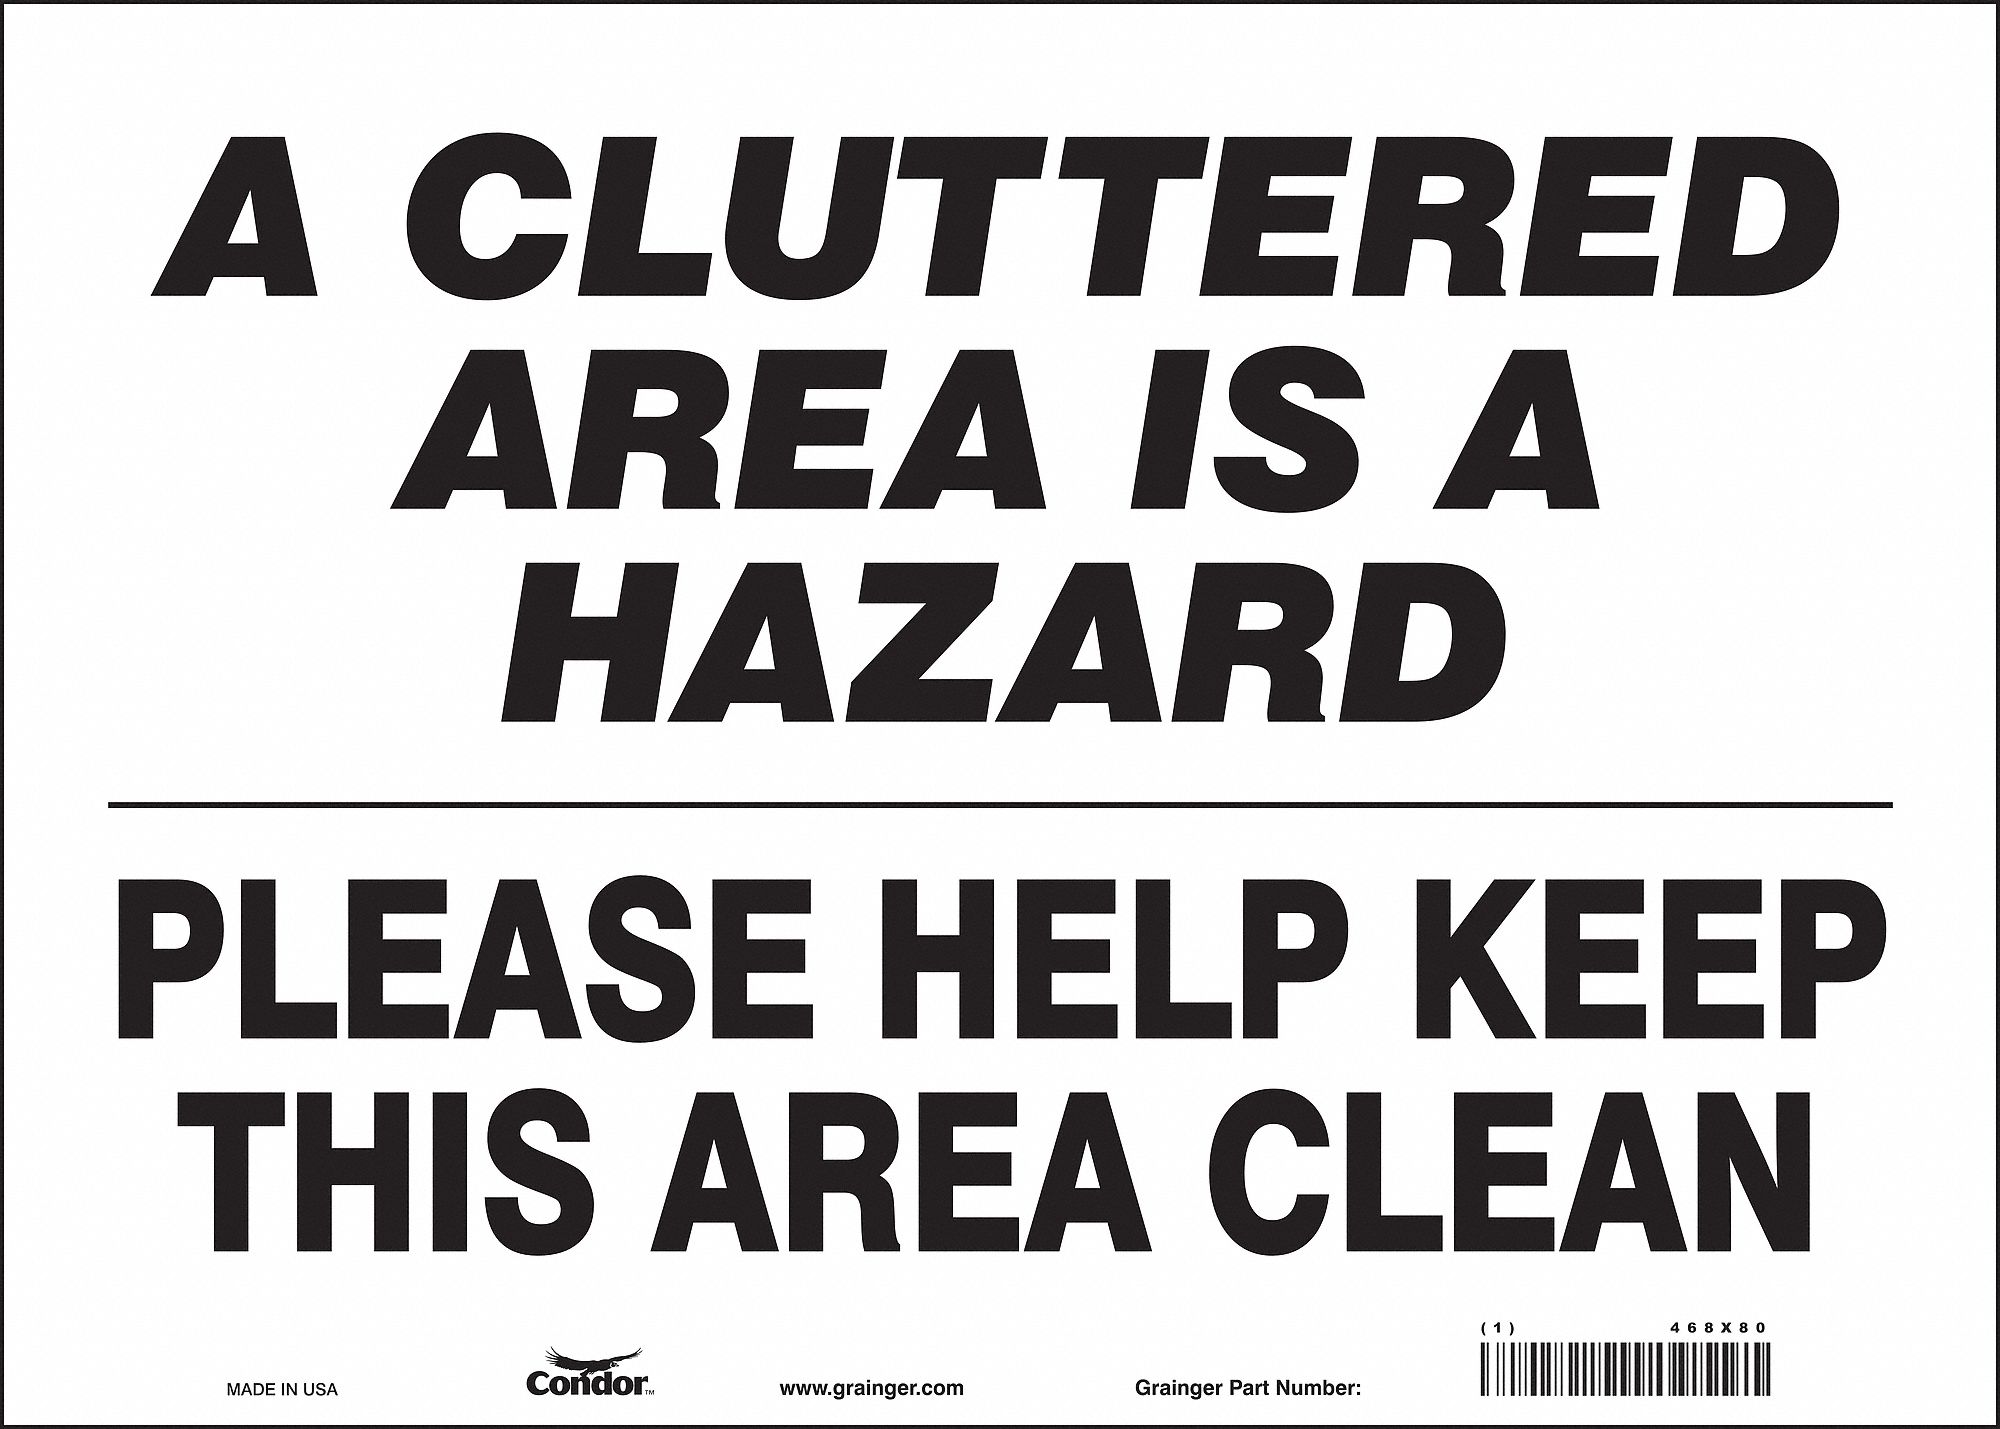 Vinyl, Adhesive Sign Mounting, Safety Sign - 468X80|468X80 - Grainger